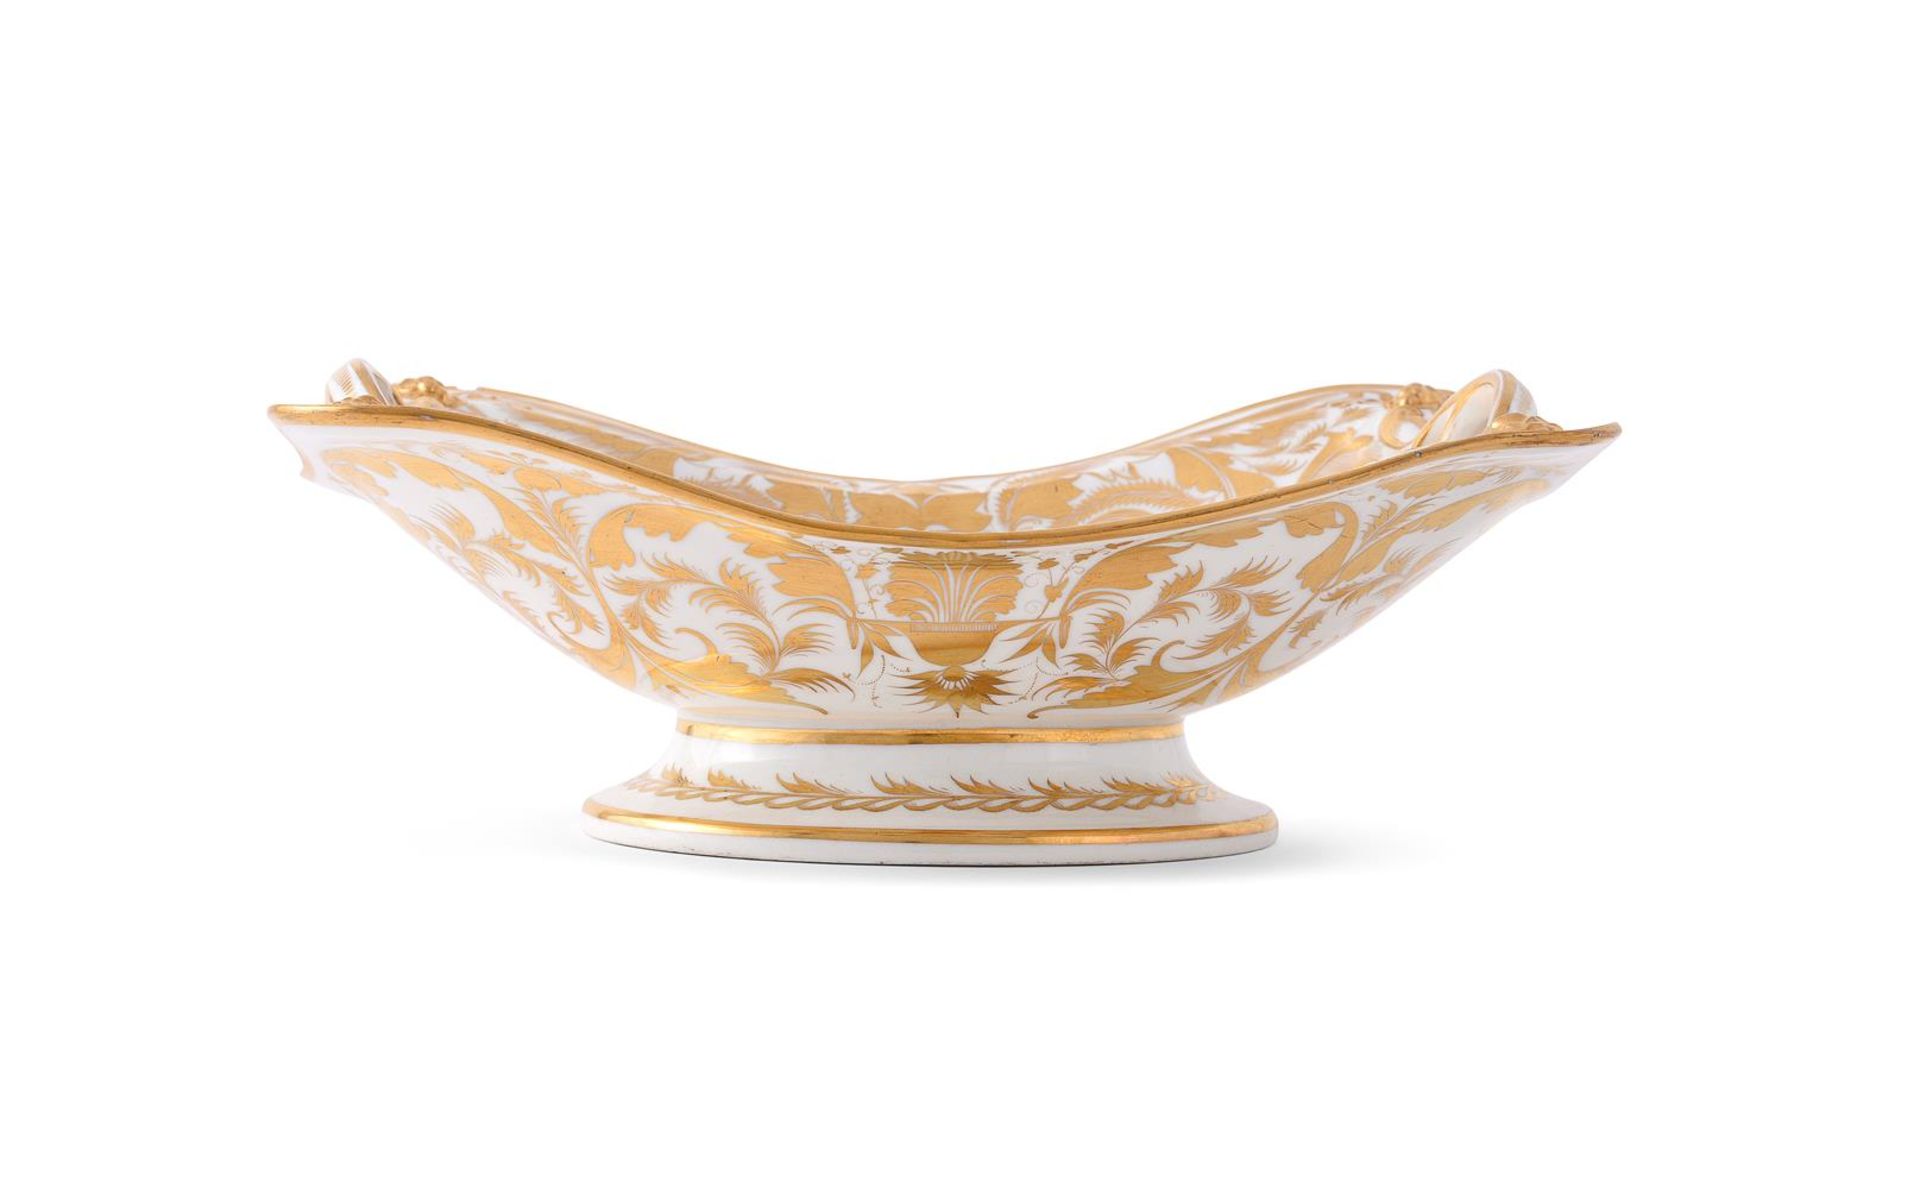 A DERBY PORCELAIN COMPOSITE TOPOGRAPHICAL PART DESSERT SERVICE, FIRST QUARTER 19TH CENTURY - Image 4 of 5